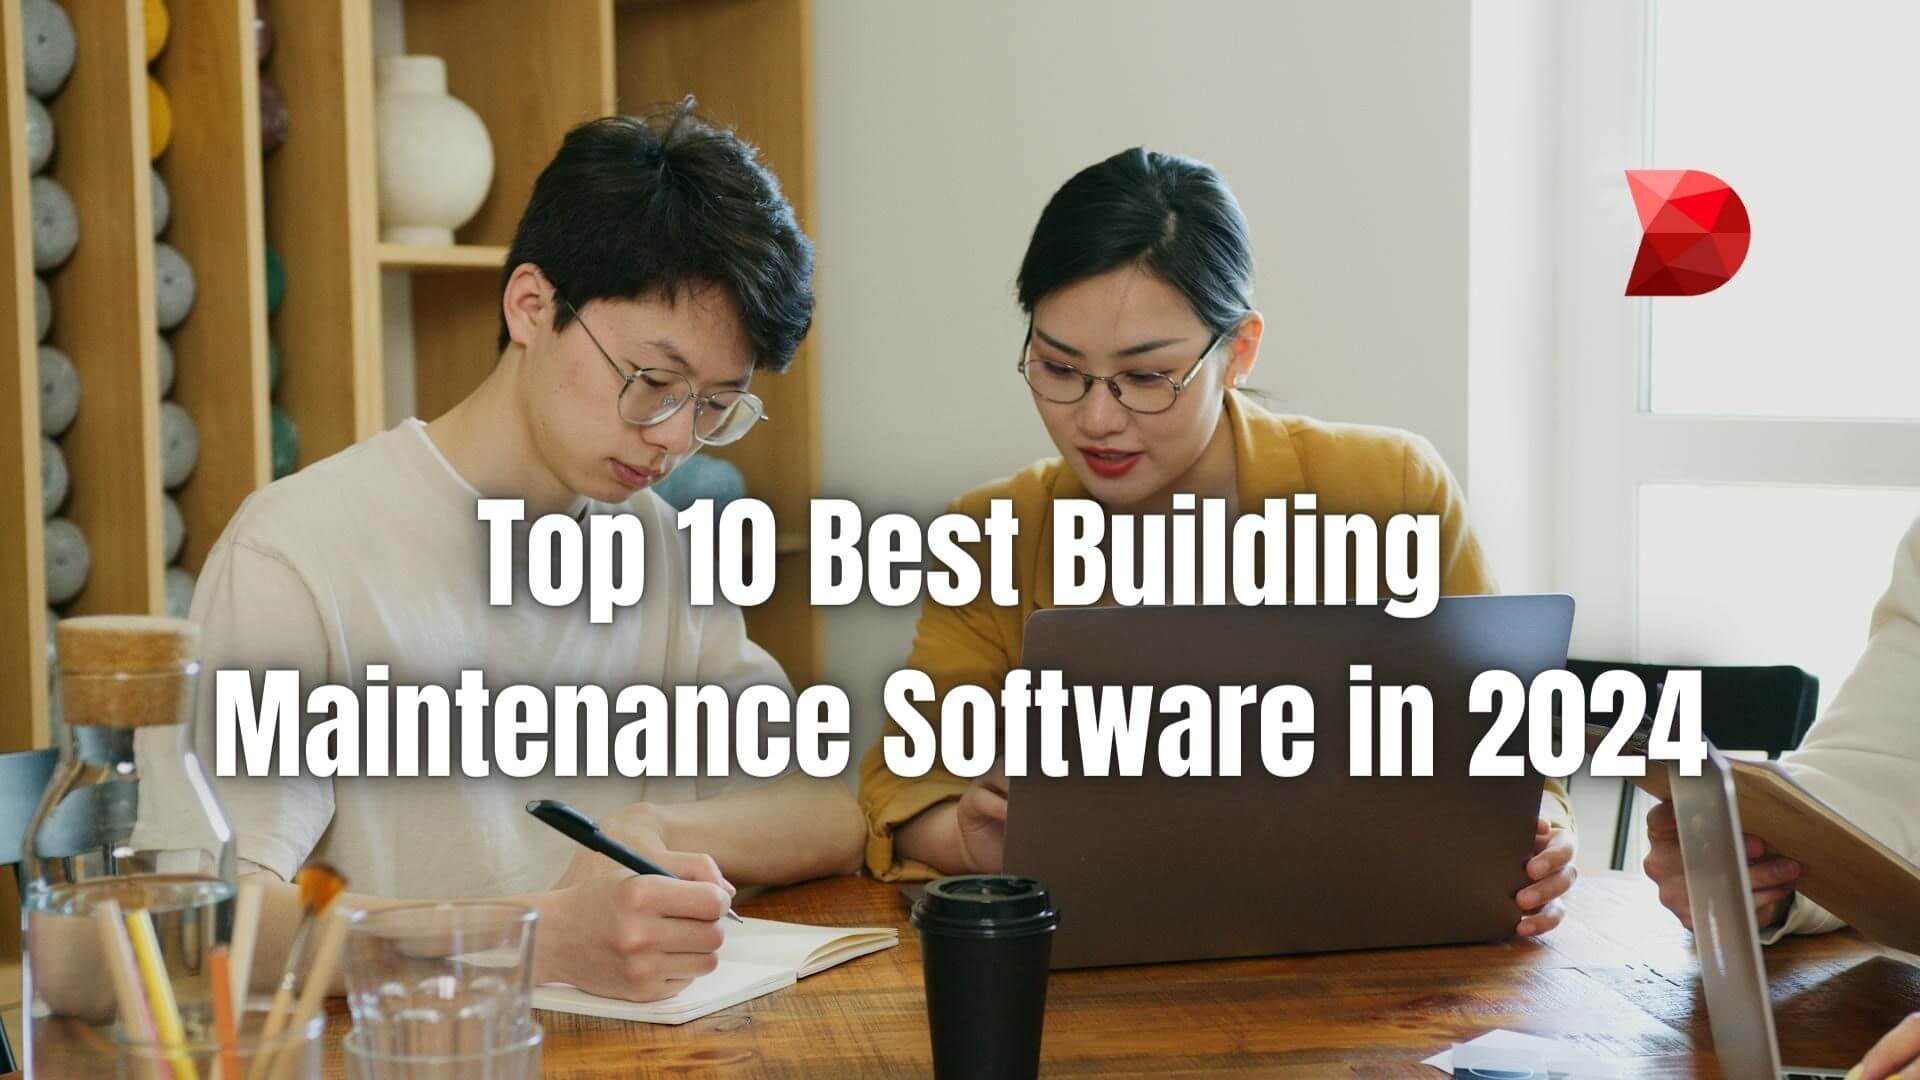 Streamline operations efficiently! Click here to discover the ultimate list of the top building maintenance software solutions for 2024.